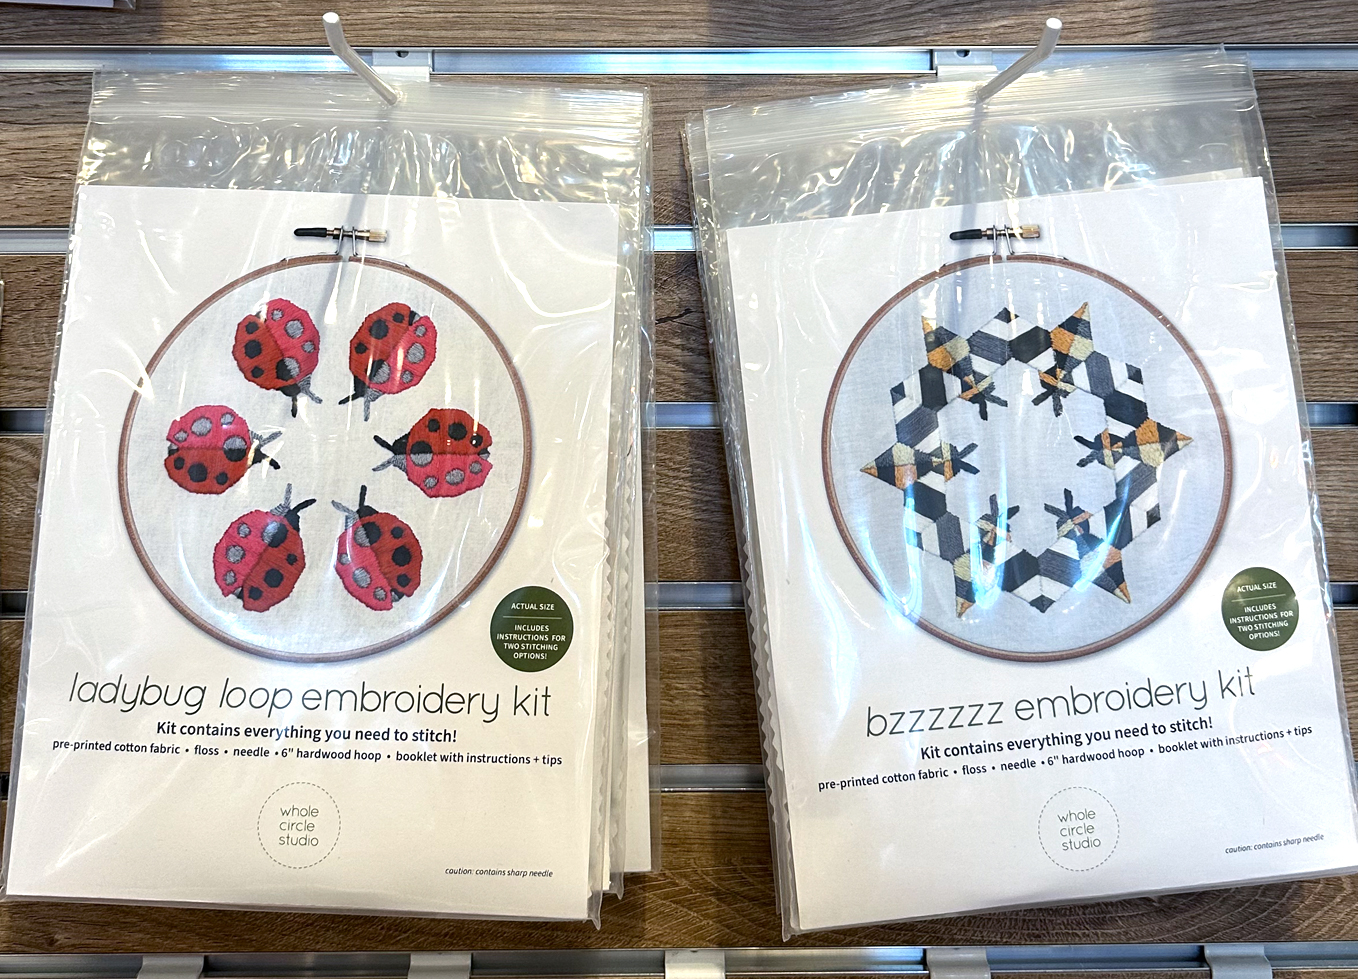 two embroidery kits that look like ladybugs and bees in a circle